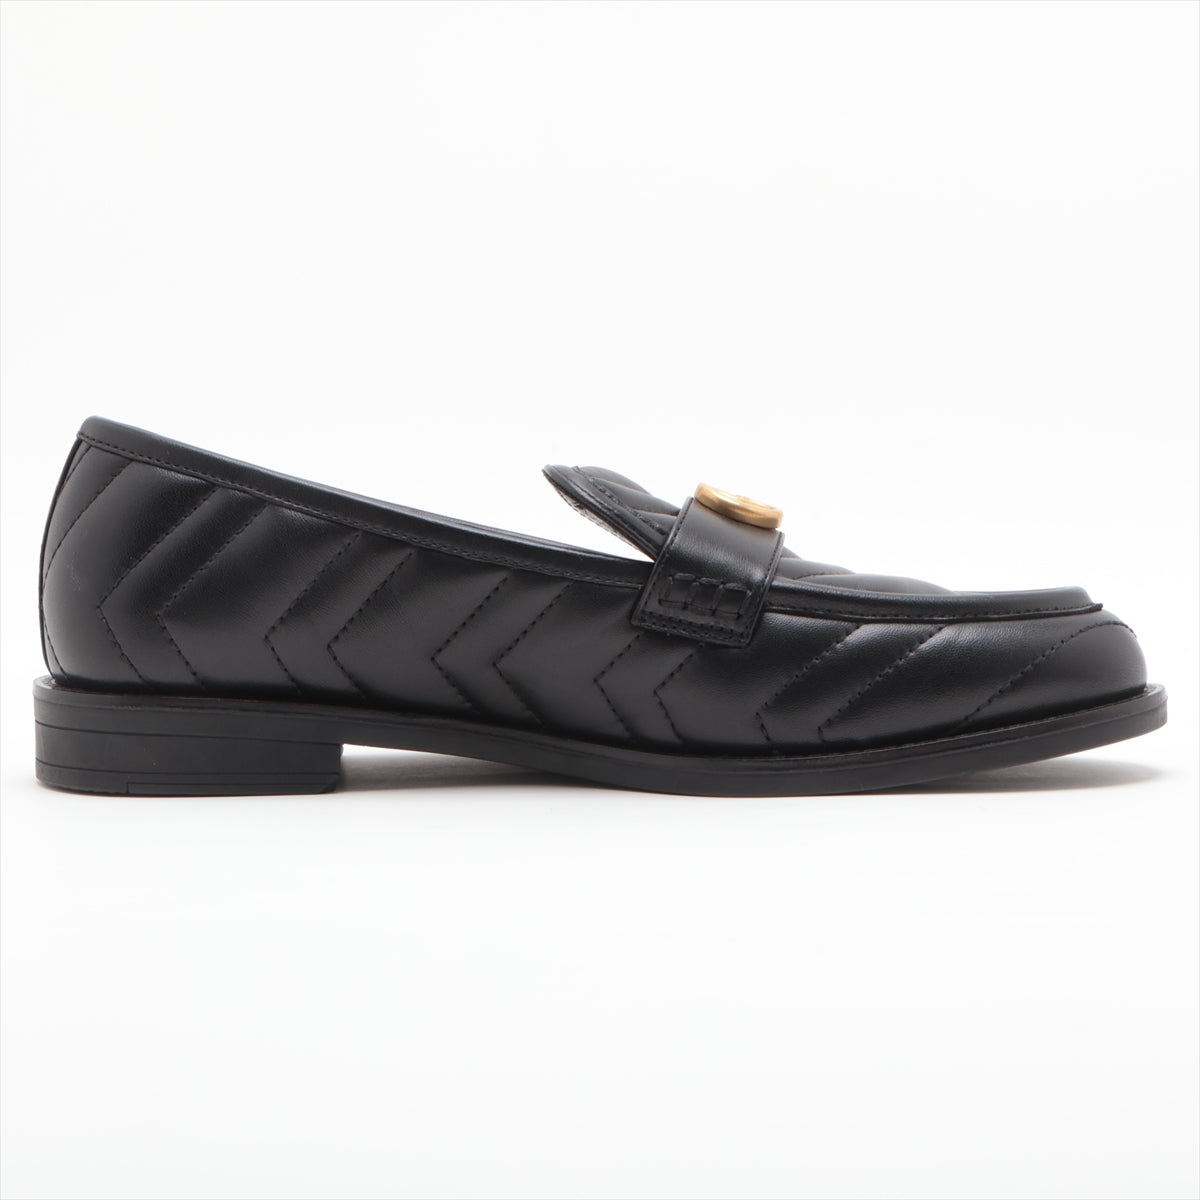 Gucci GG Marmont Leather Loafer 38 Ladies' Black 670399